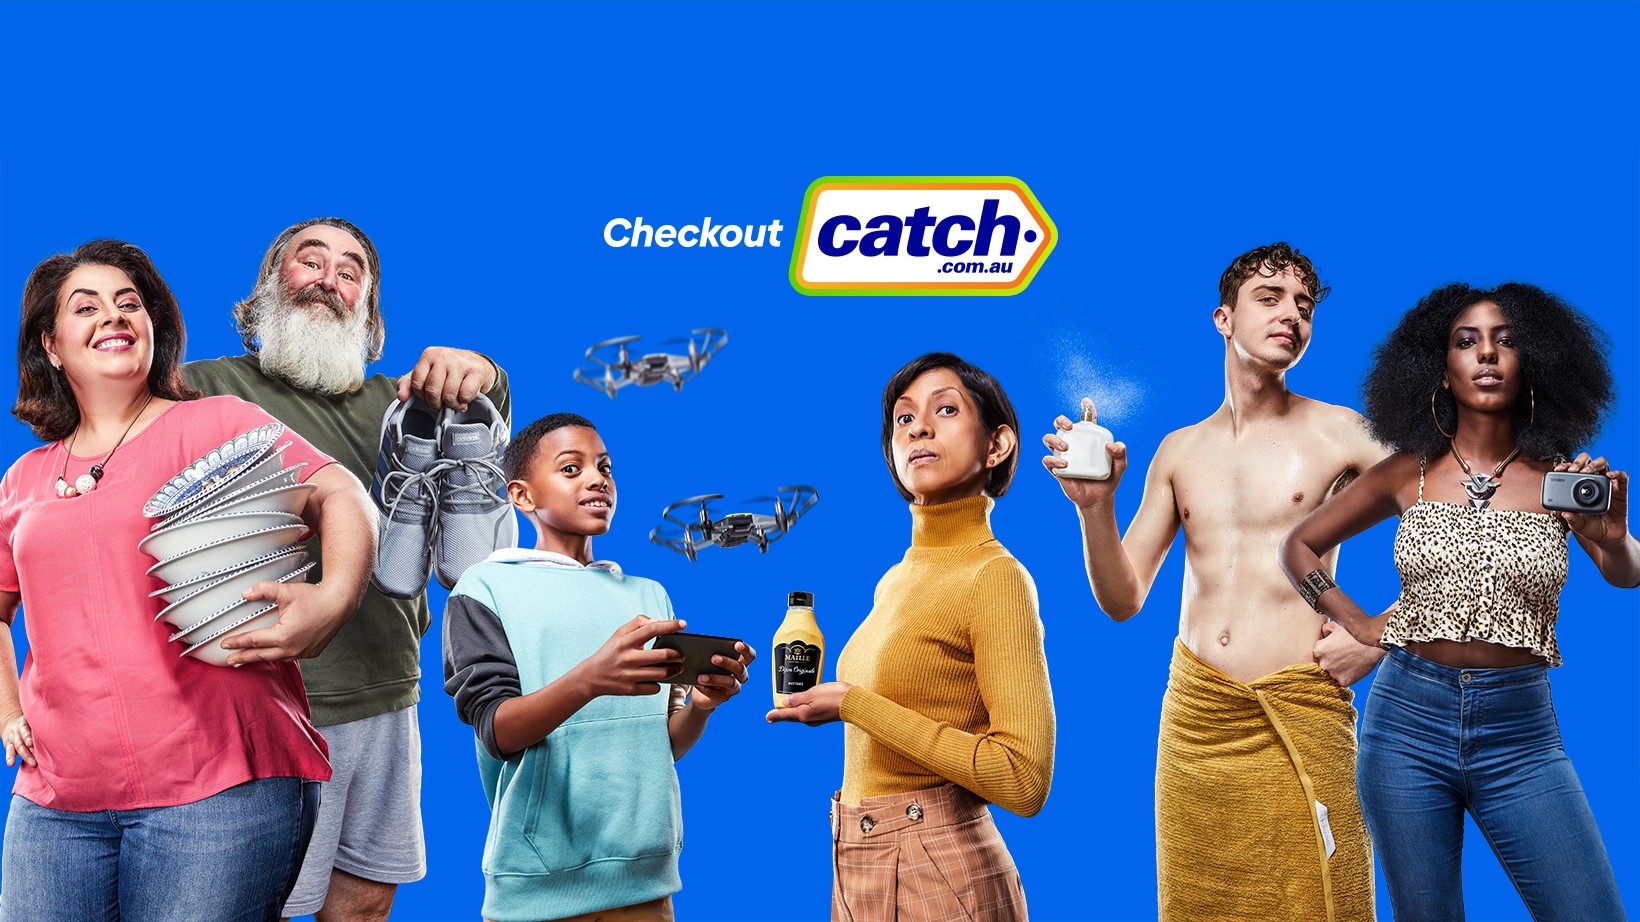 Catch’s Fest Sale: 25% Mattel toys, Up to 50% OFF Converse, Up to 40% OFF Bonds